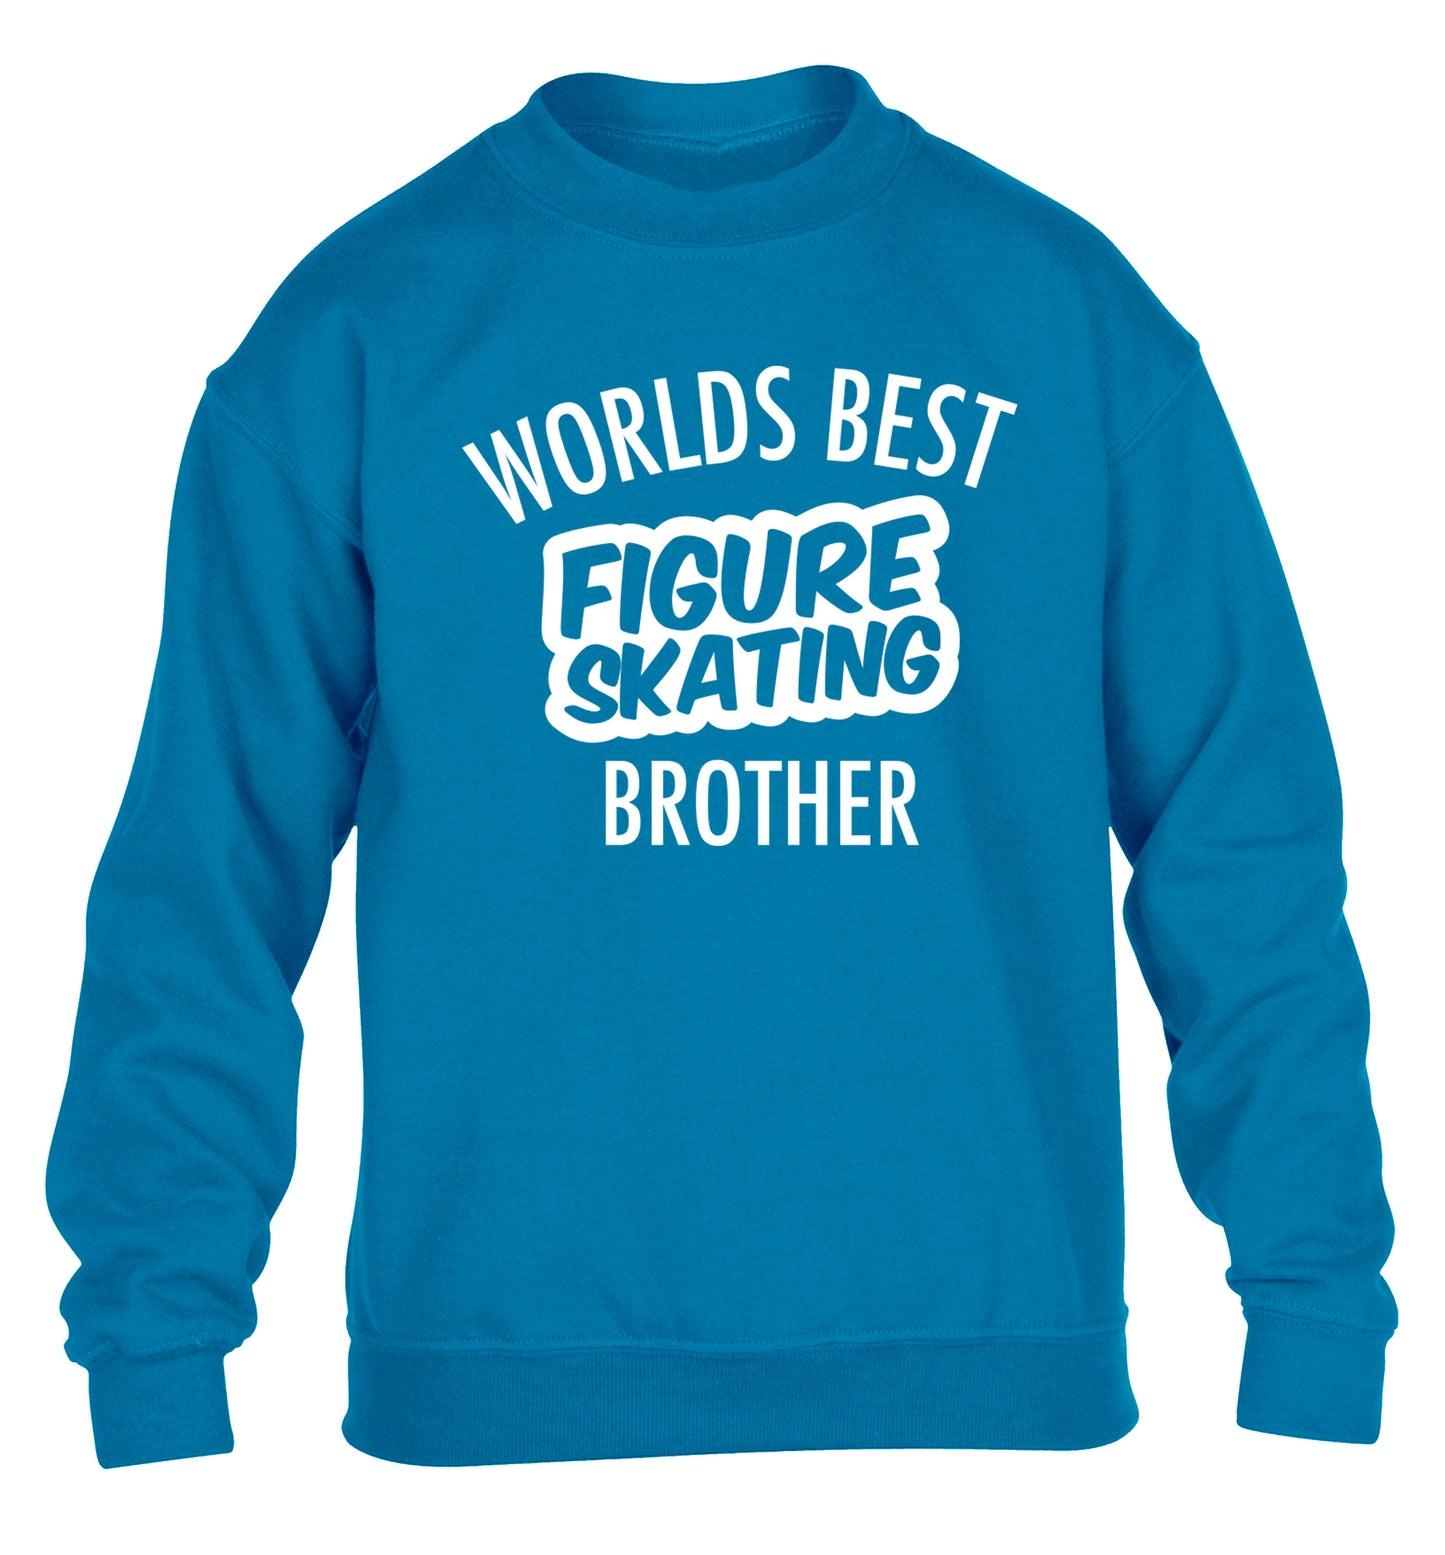 Worlds best figure skating brother children's blue sweater 12-14 Years